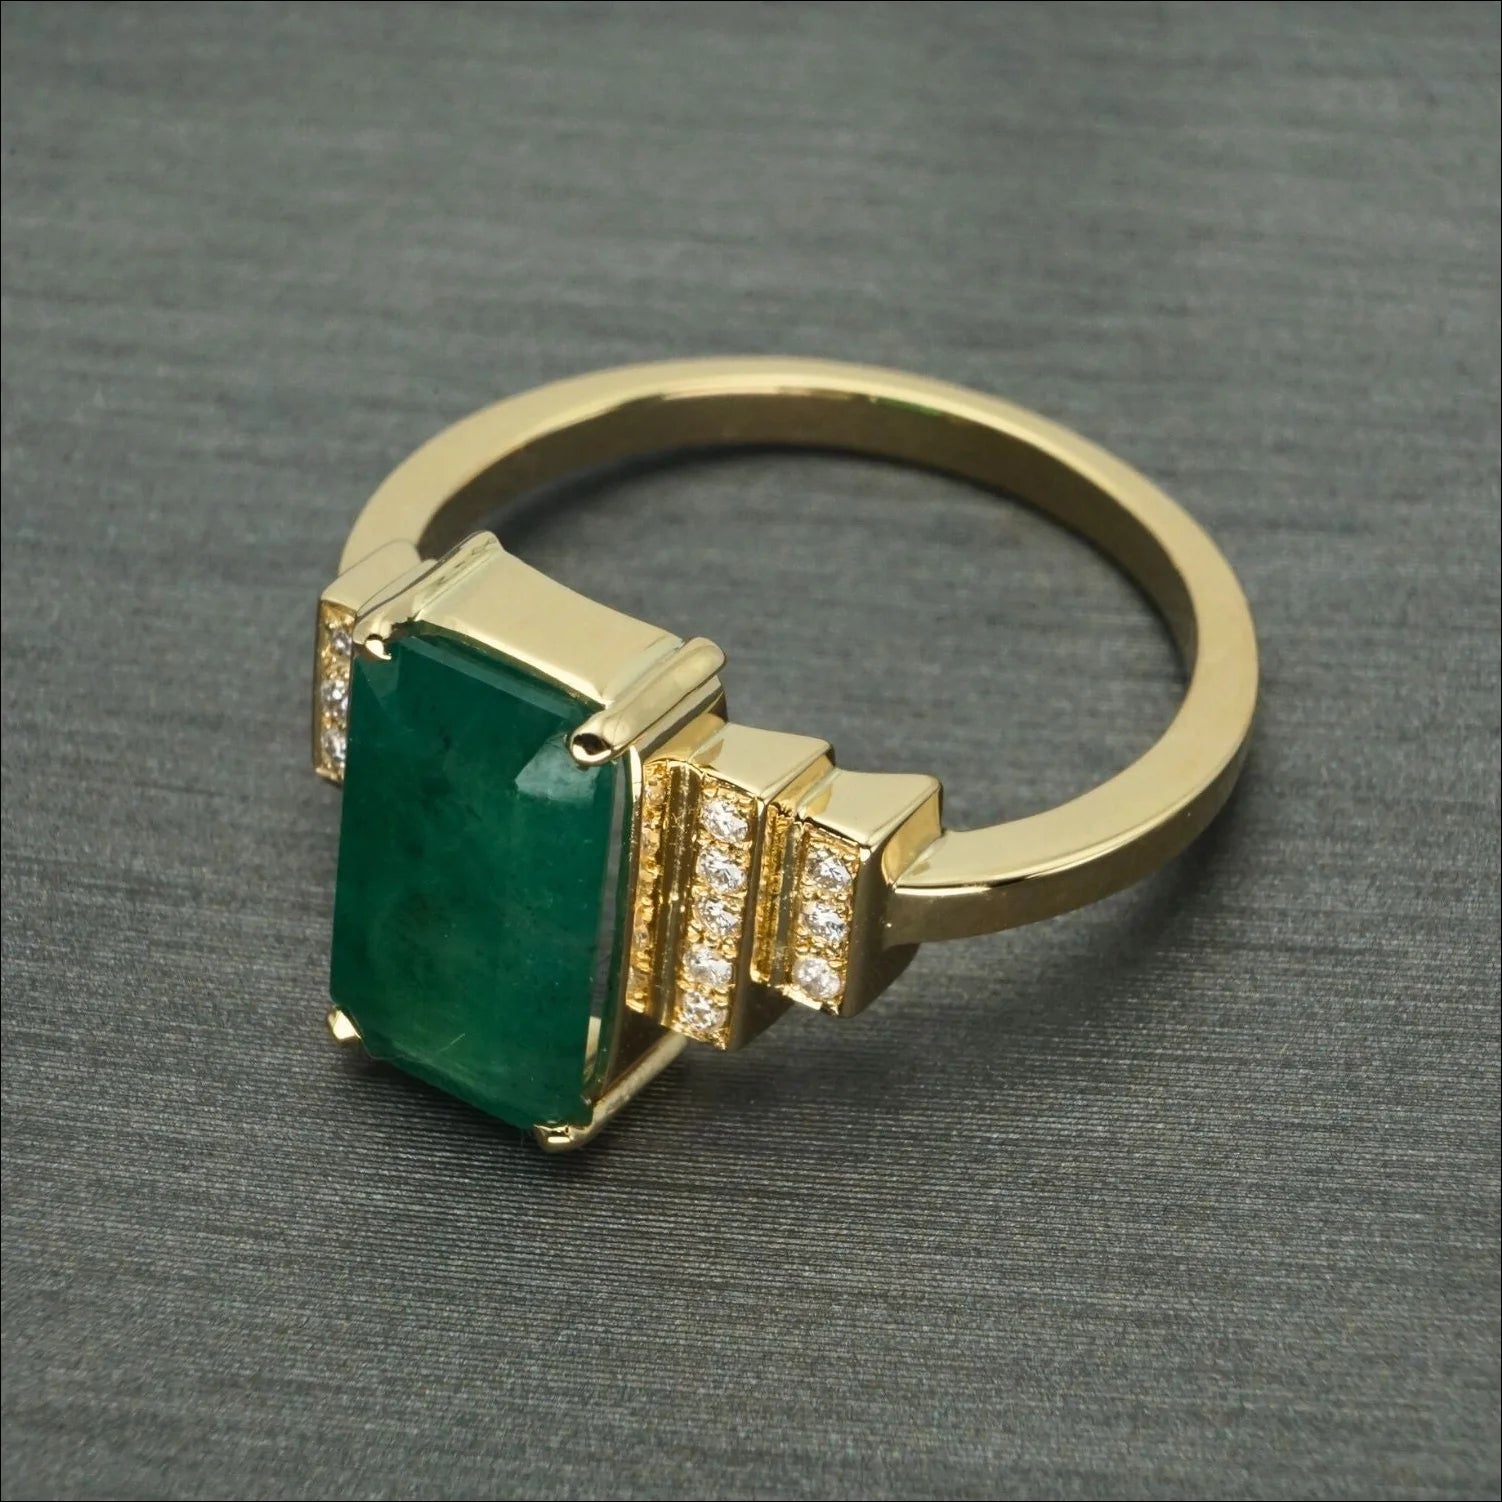 Exquisite 18k Gold Ring with 2.3ct Emerald | Rings